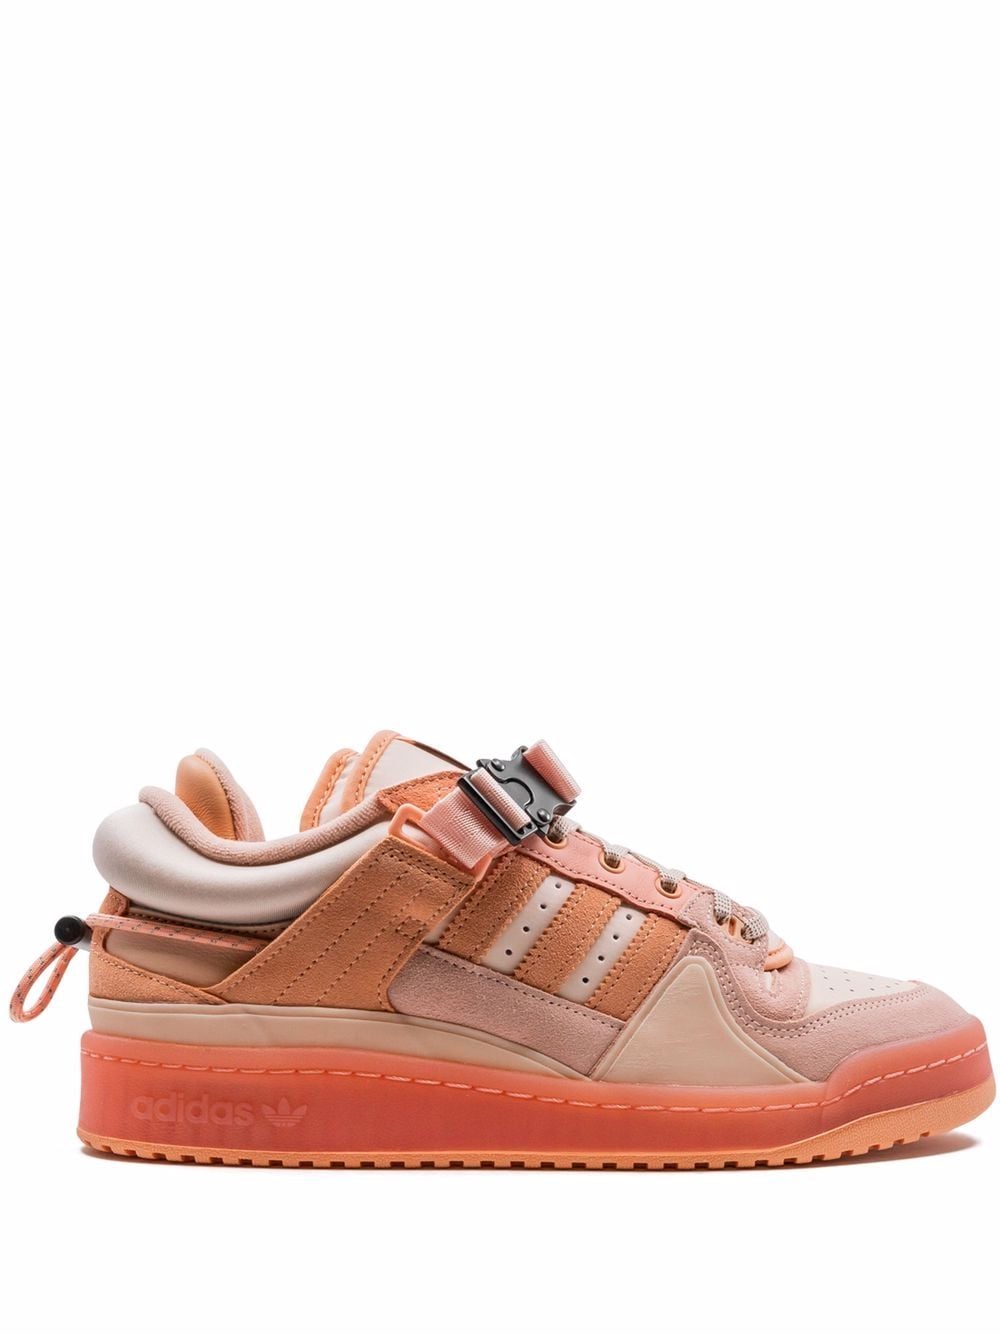 Adidas x Bad Bunny Forum Buckle Low Easter Egg Sneakers - Farfetch